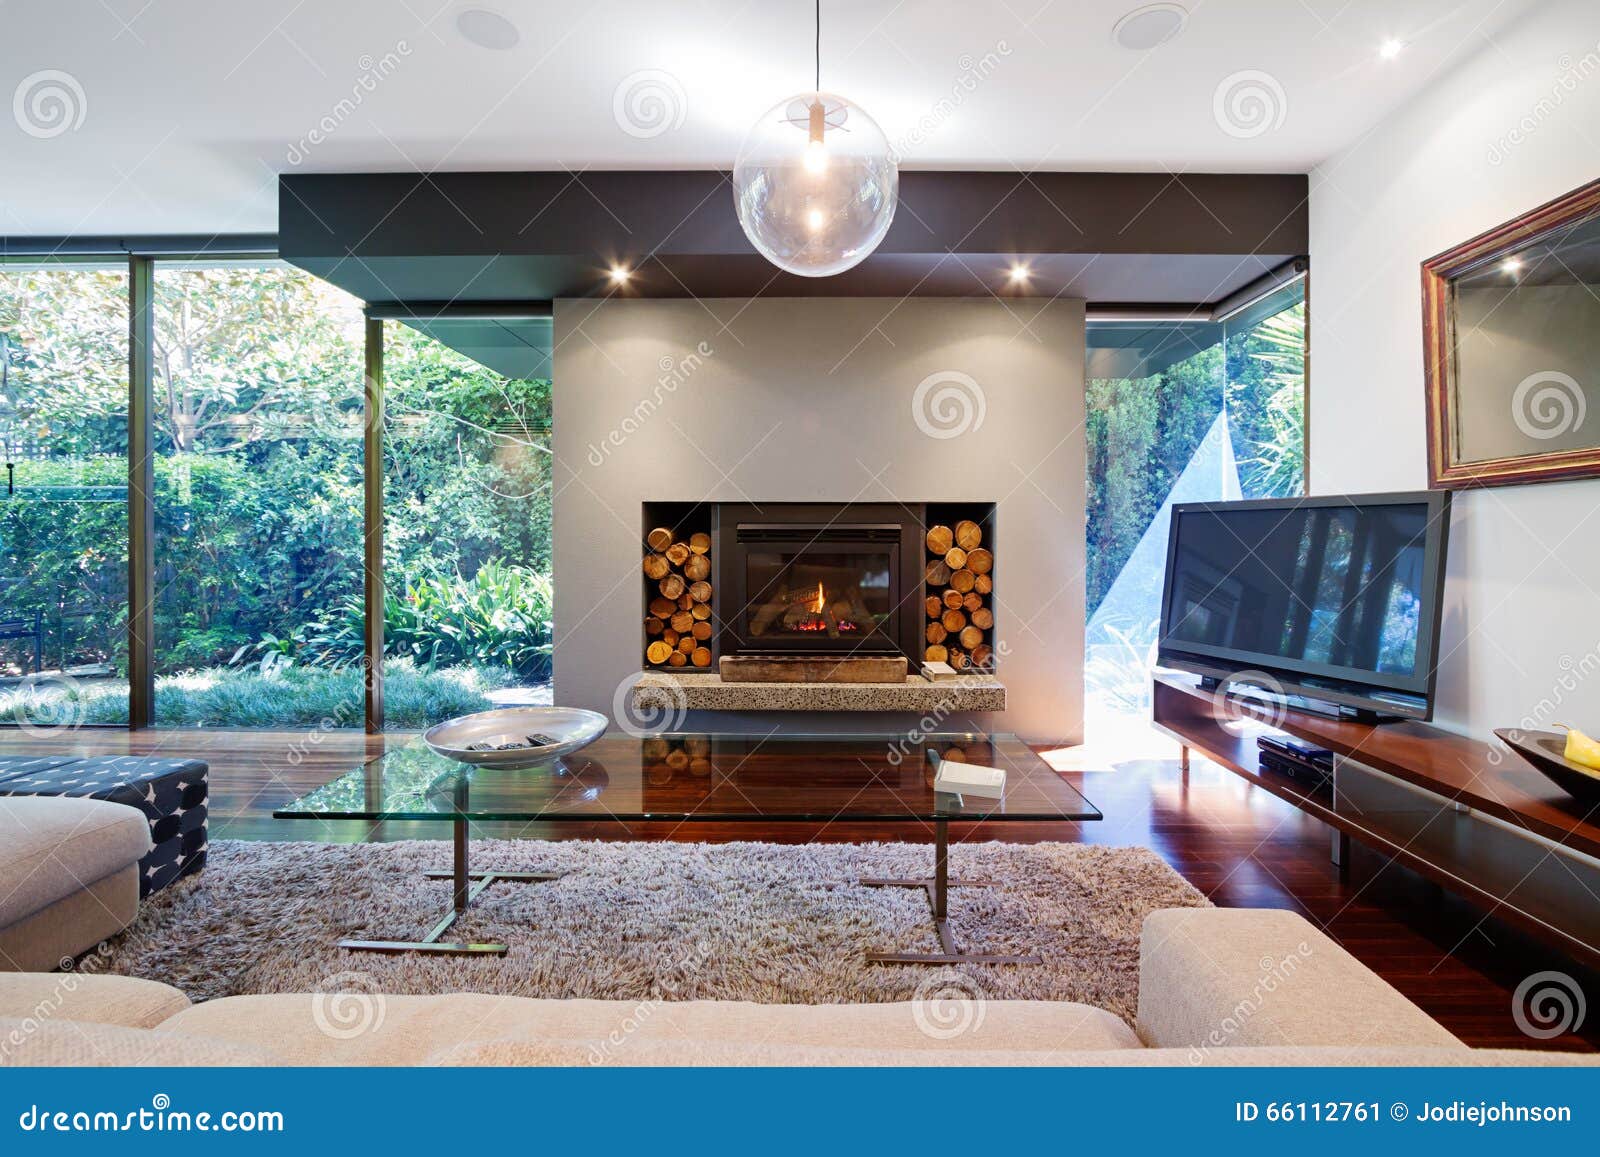 warm australian living room with fireplace in luxury home